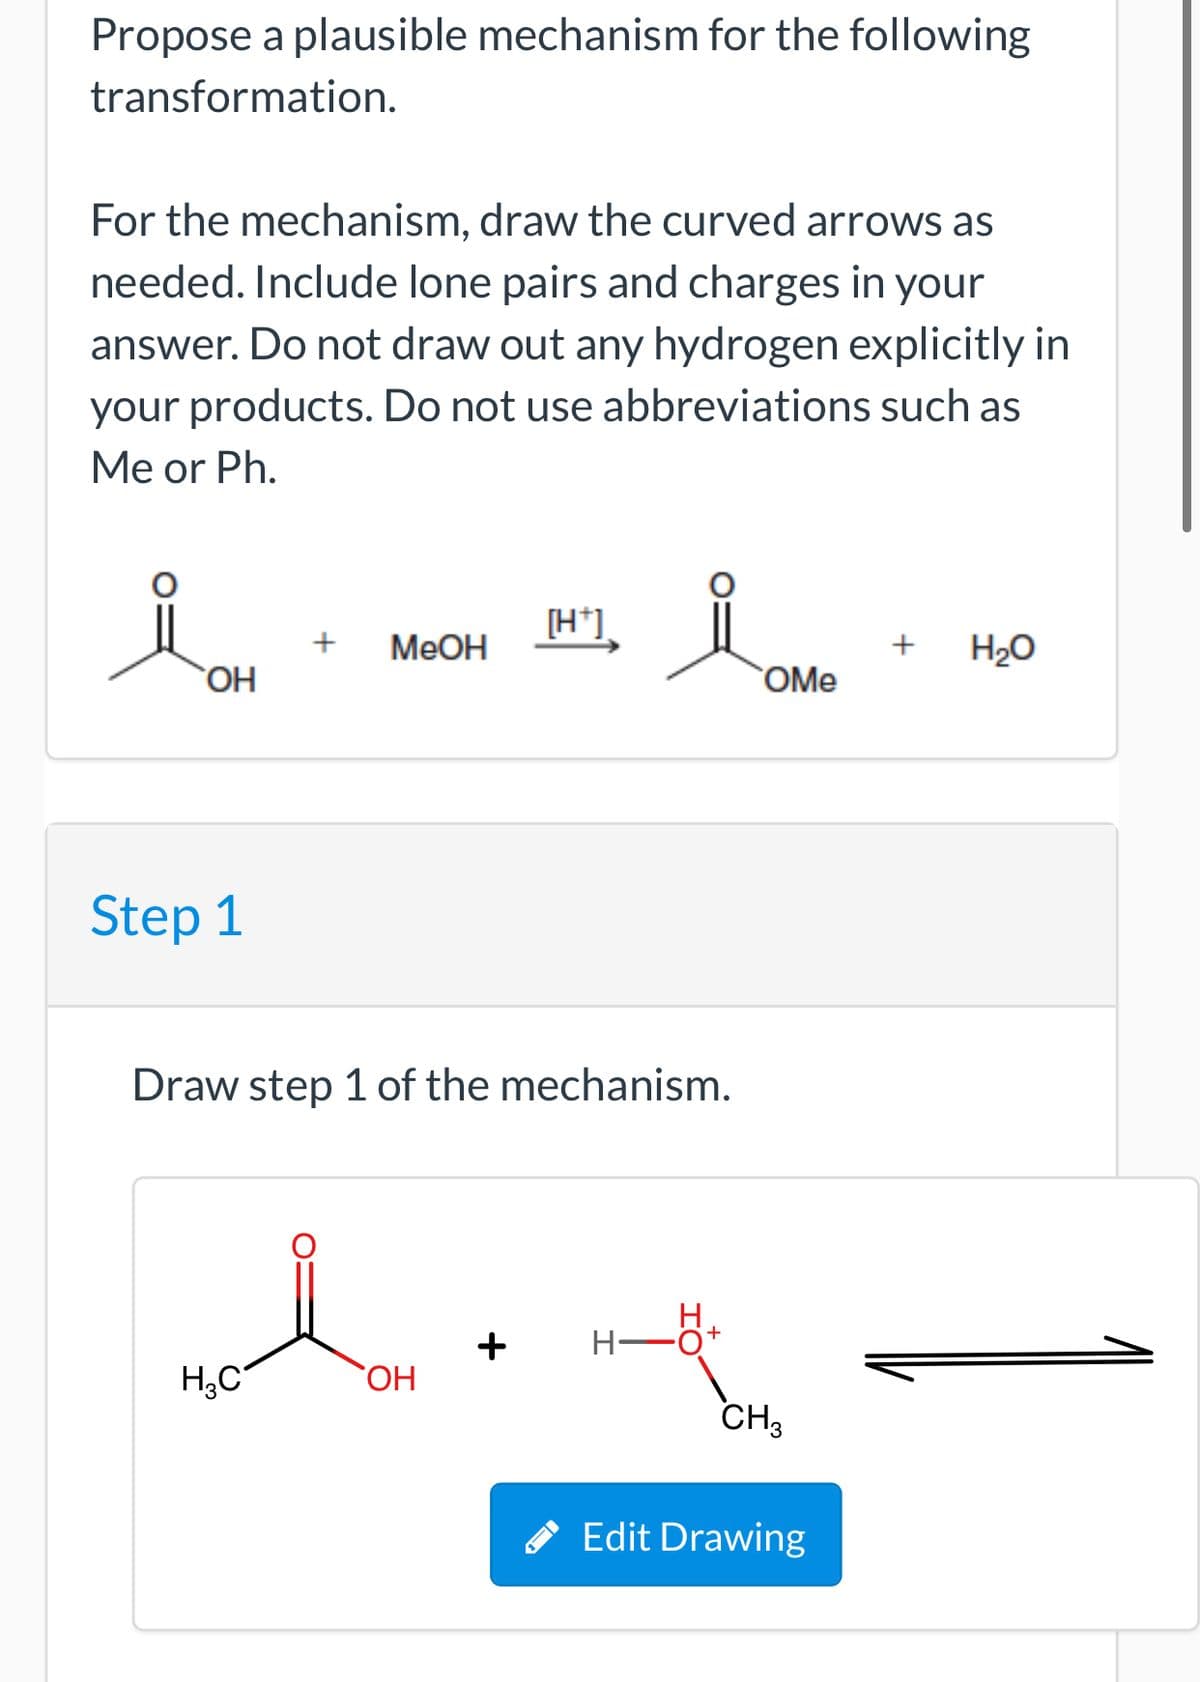 Propose a plausible mechanism for the following
transformation.
For the mechanism, draw the curved arrows as
needed. Include lone pairs and charges in your
answer. Do not draw out any hydrogen explicitly in
your products. Do not use abbreviations such as
Me or Ph.
[H*]
+
MeOH
+
H2O
OH
OMe
Step 1
Draw step 1 of the mechanism.
H.
+
CH,
Edit Drawing
